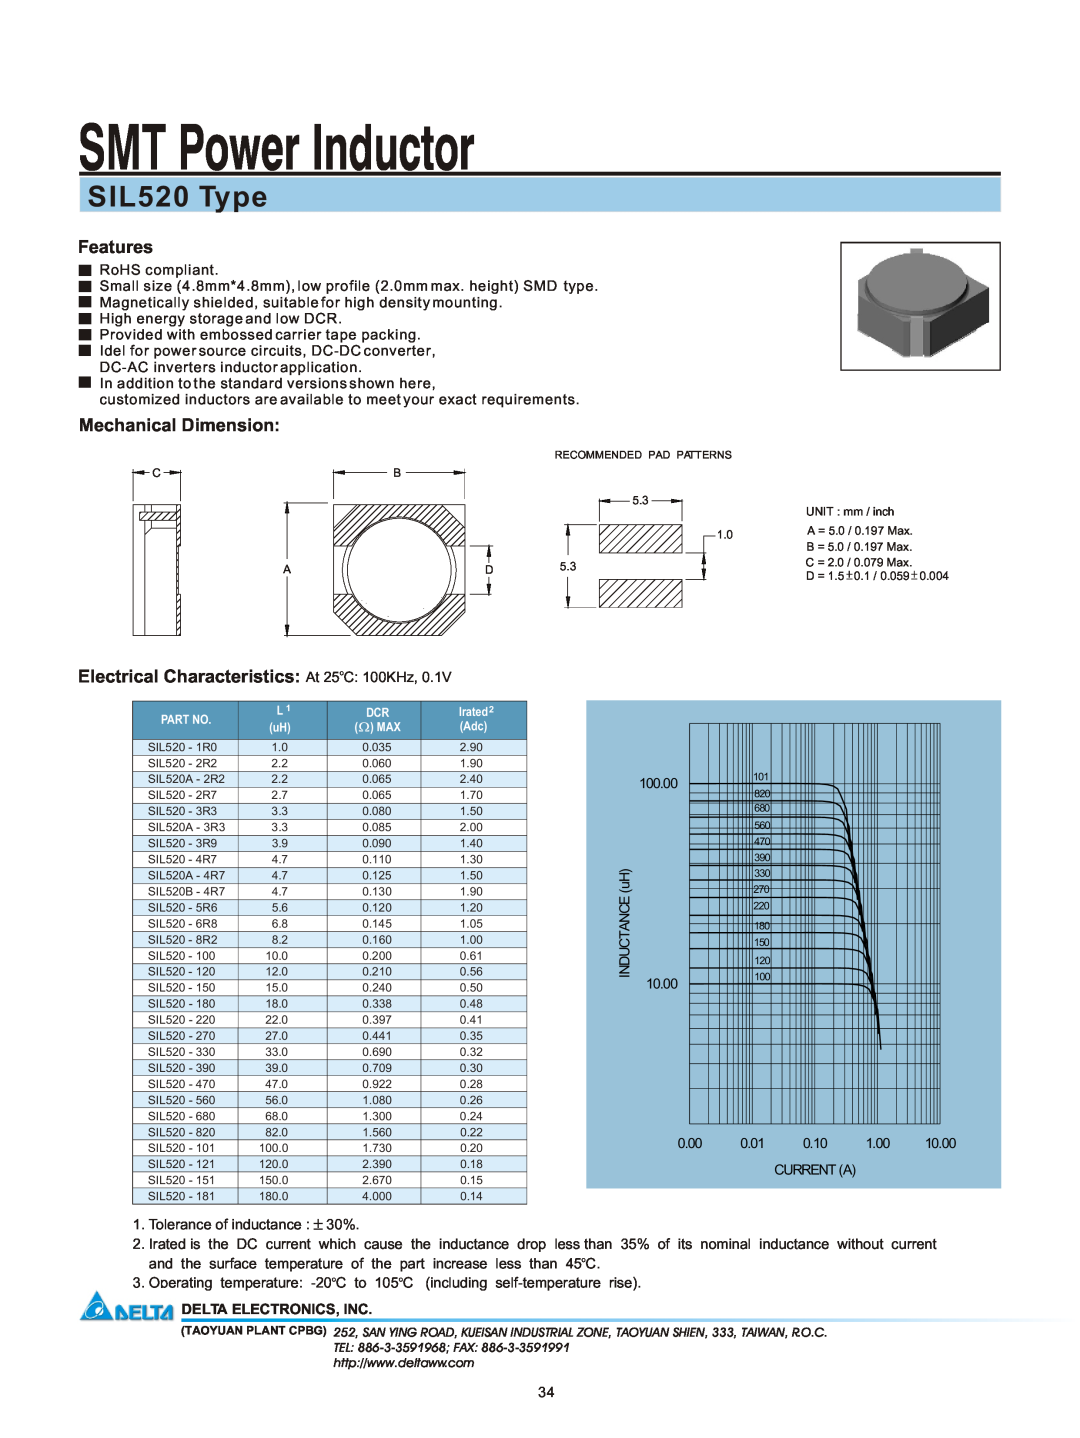 Delta Electronics manual SMT Power Inductor, SIL520 Type, Features, Mechanical Dimension, Delta Electronics, Inc 